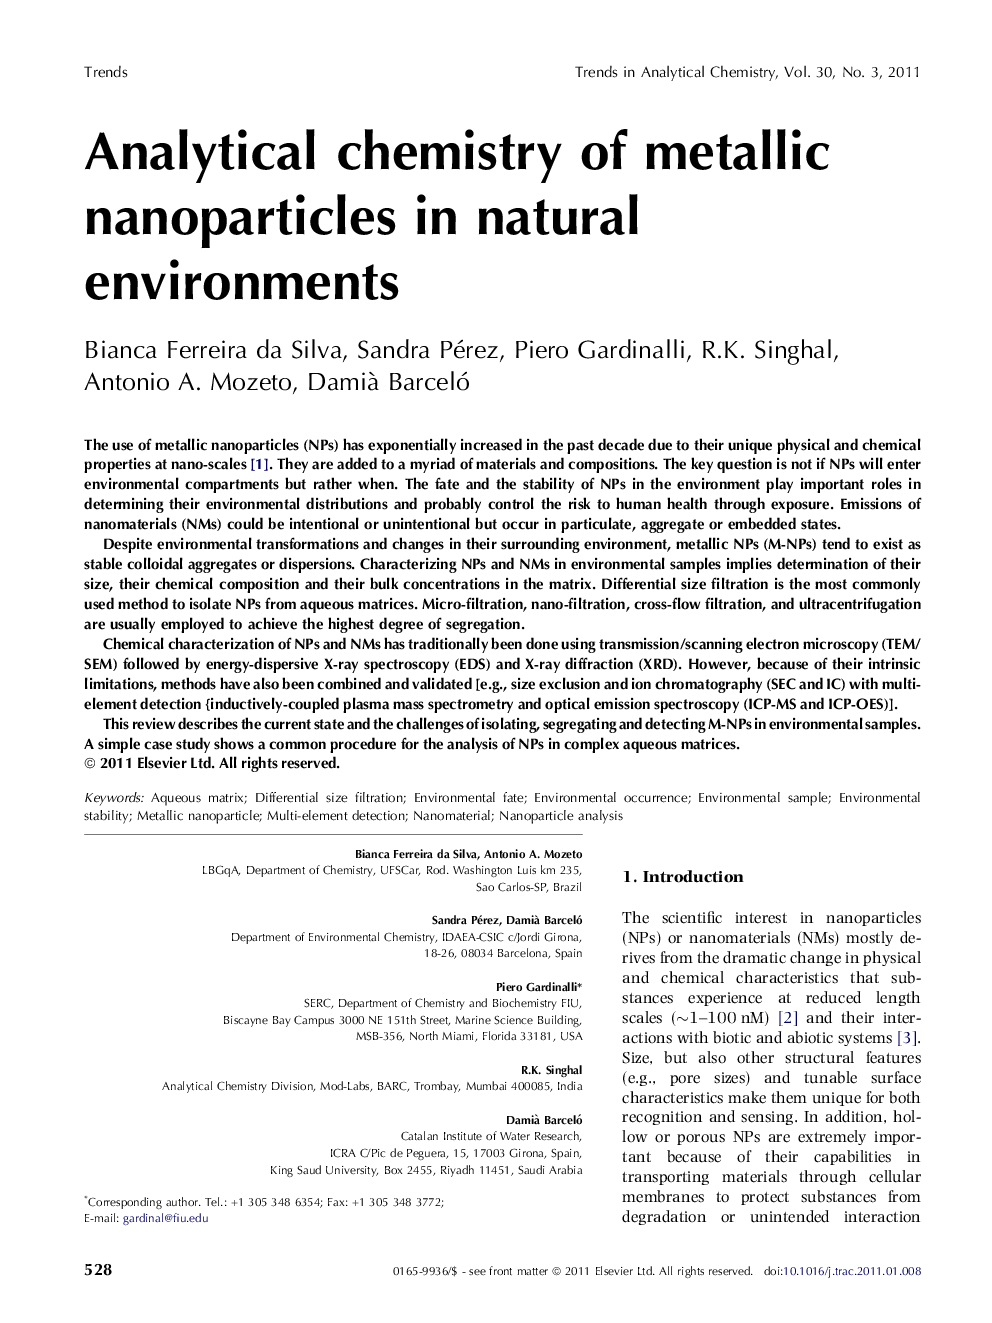 Analytical chemistry of metallic nanoparticles in natural environments